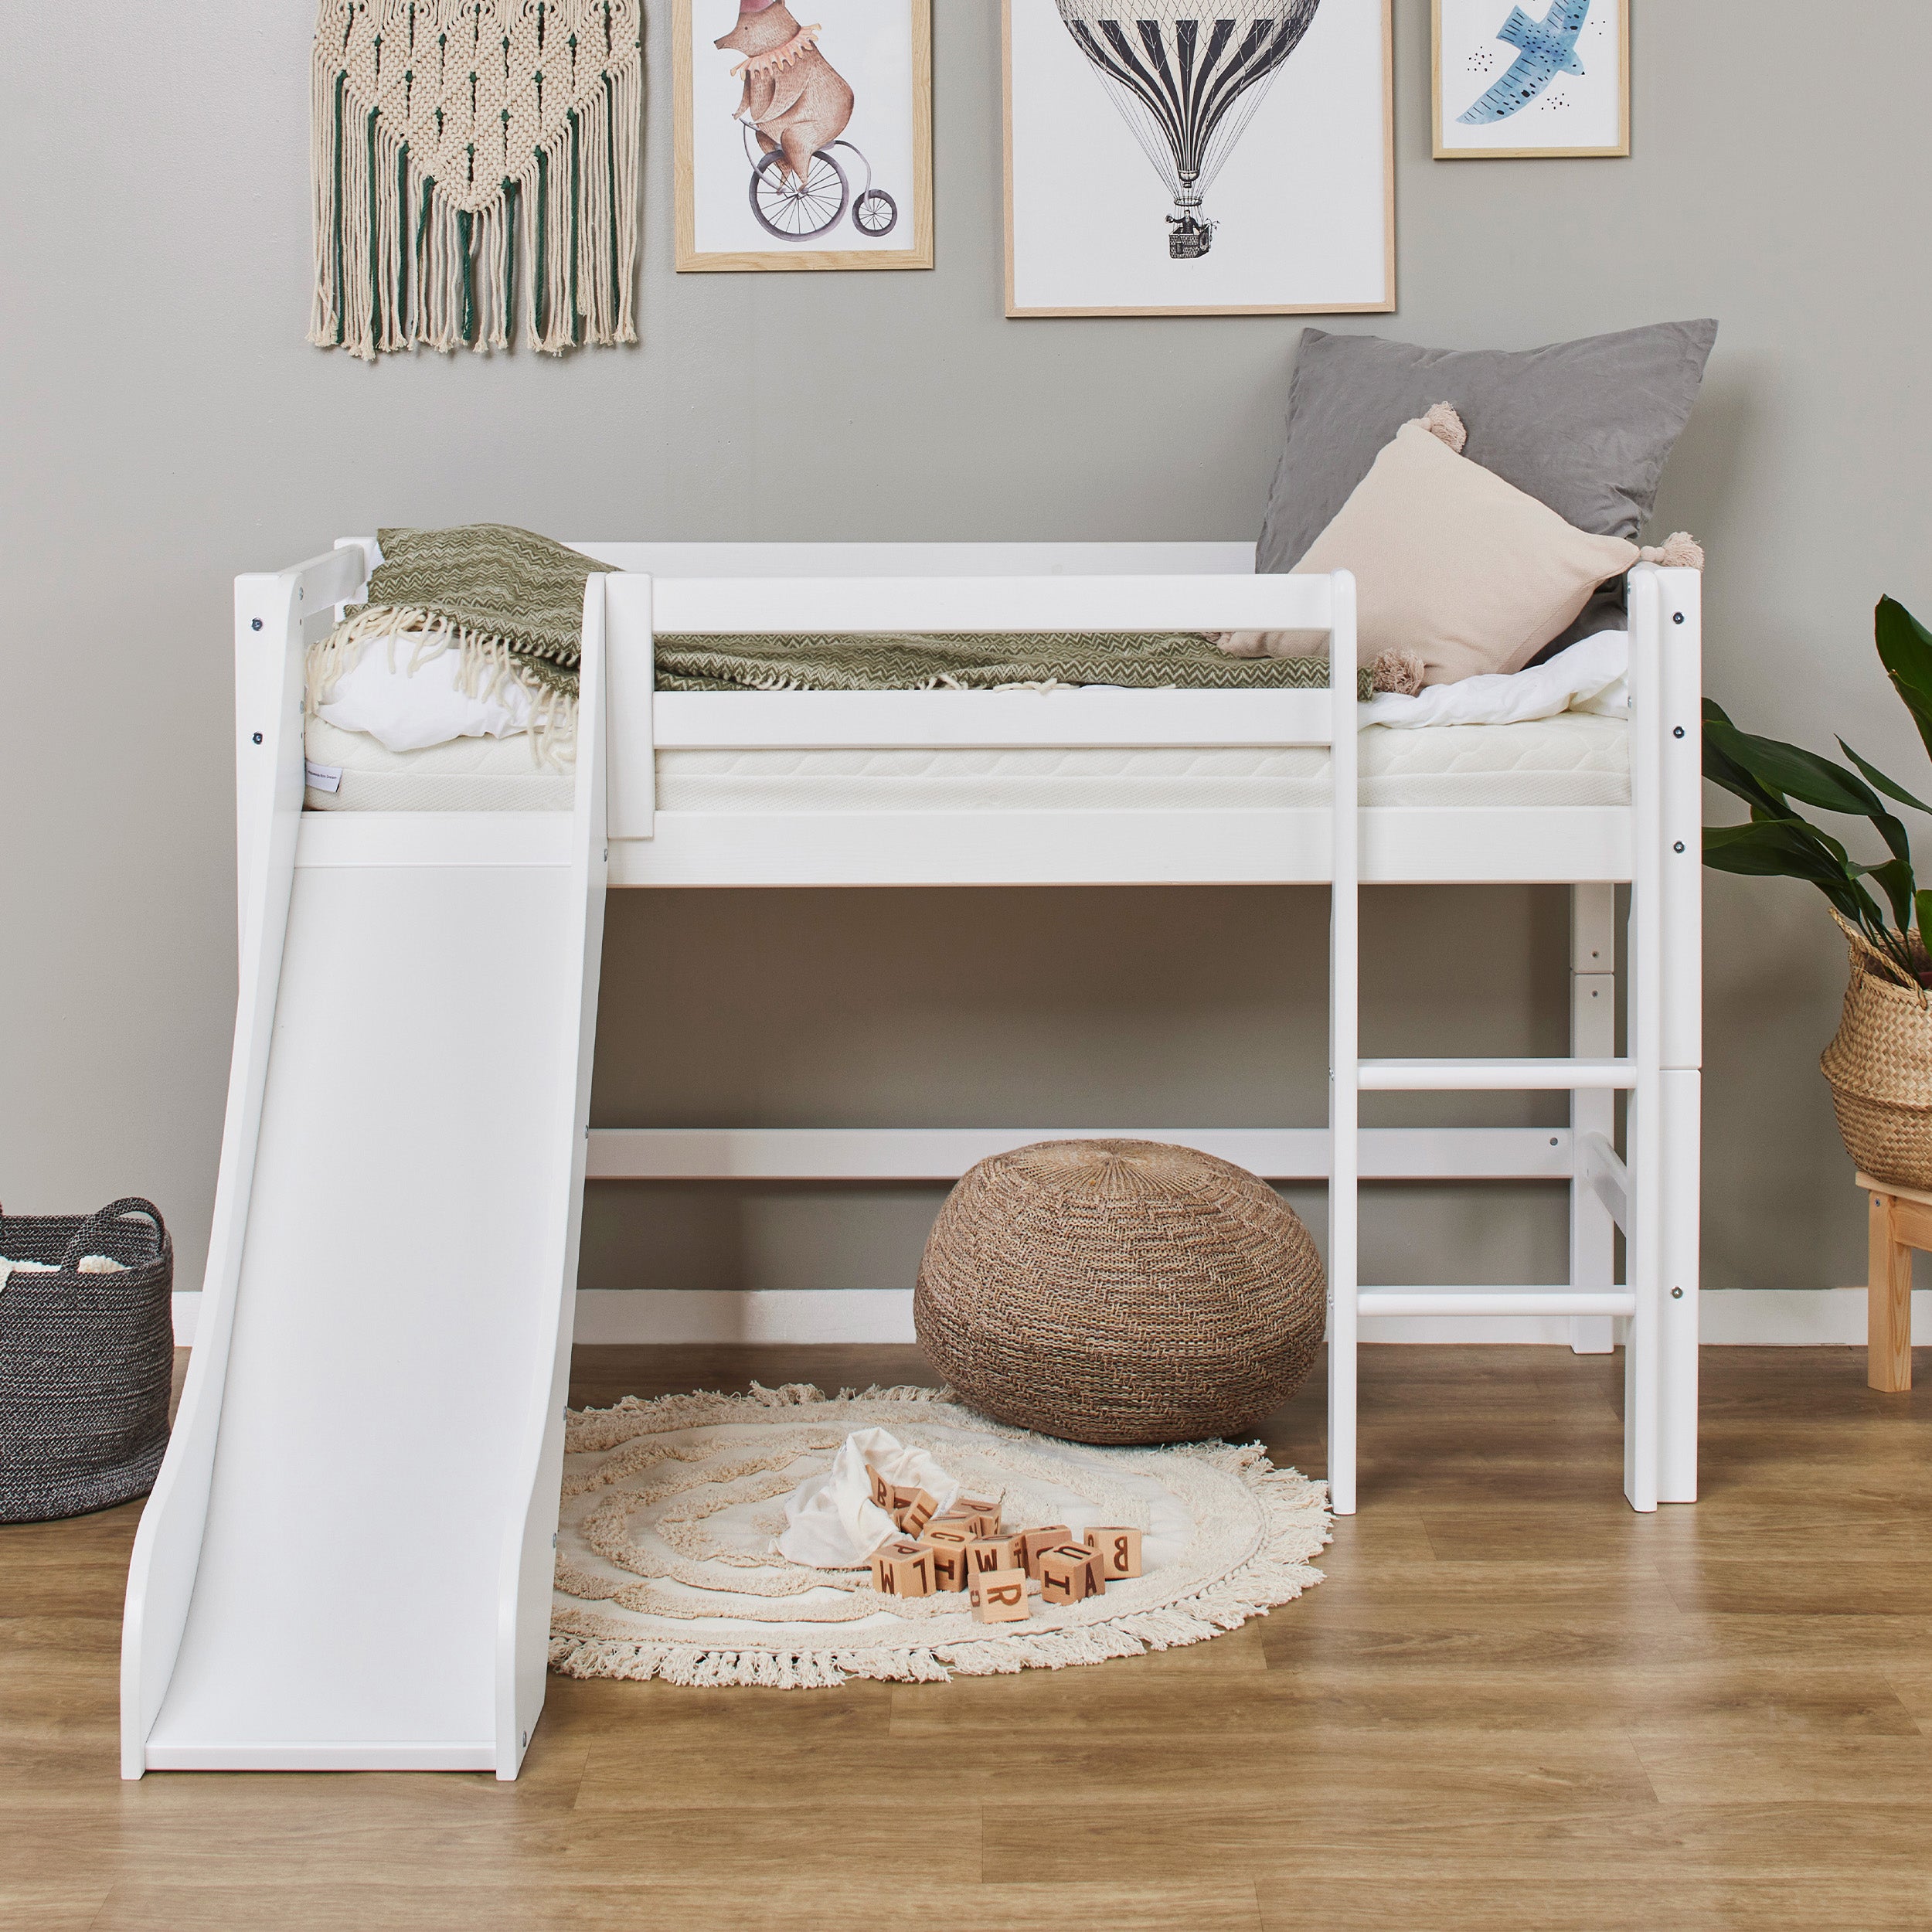 Hoppekids ECO Dream Bed Rail for Mid Sleeper Bed with Slide